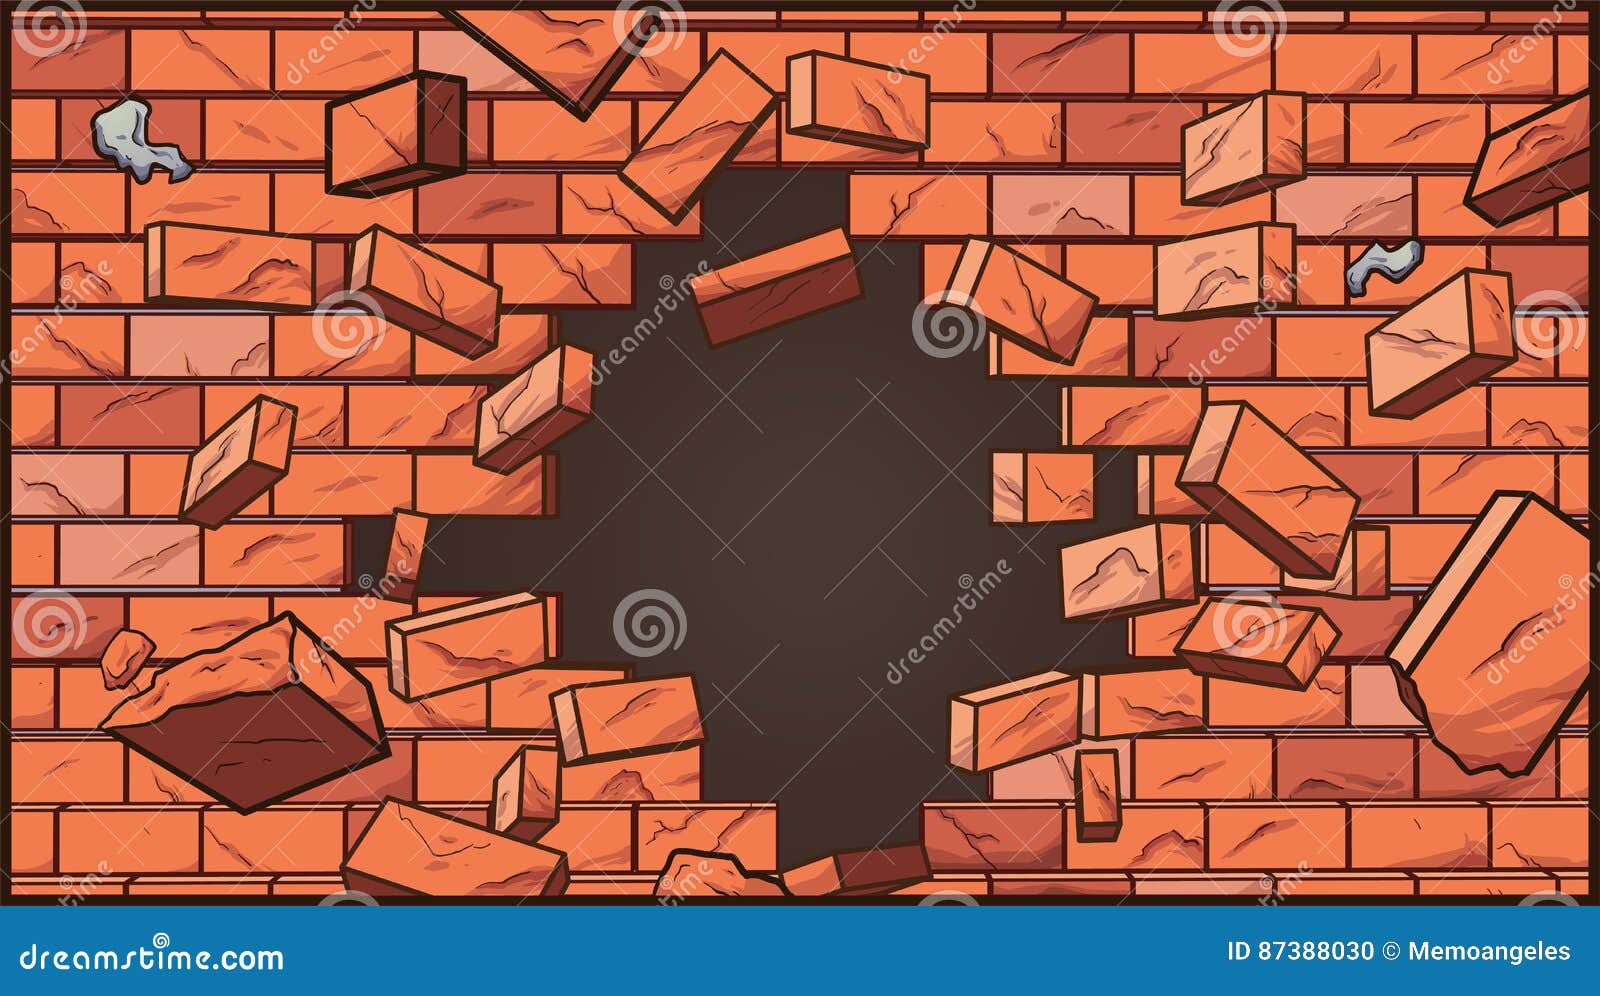 Update more than 79 anime brick wall  incdgdbentre